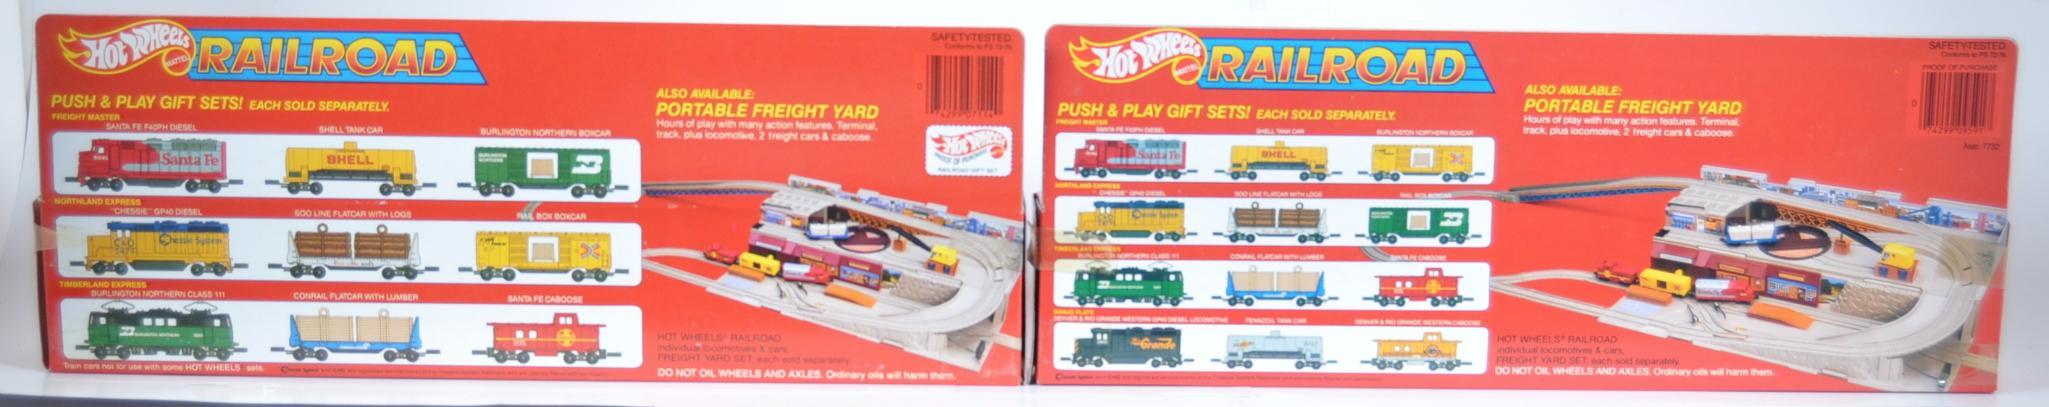 1983 Hot Wheels Railroad Northland Express Gift Pack